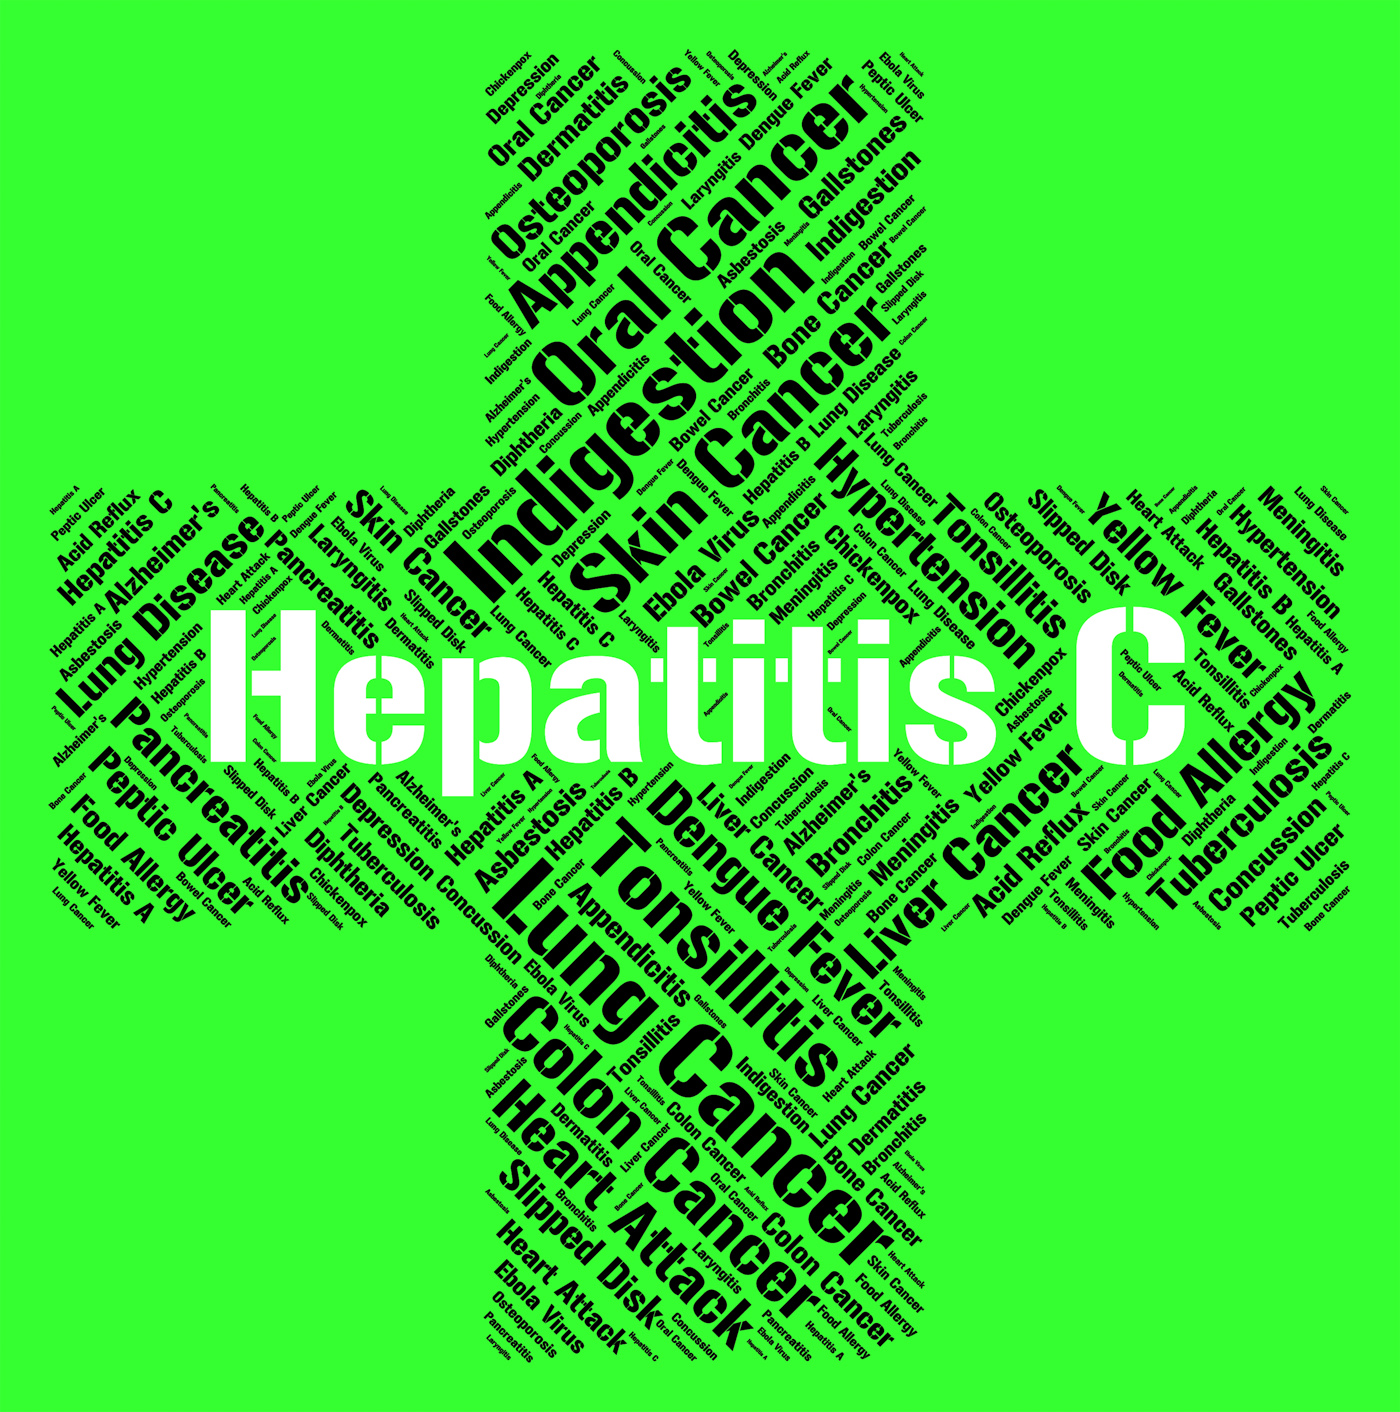 Hepatitis c means ill health and afflictions photo